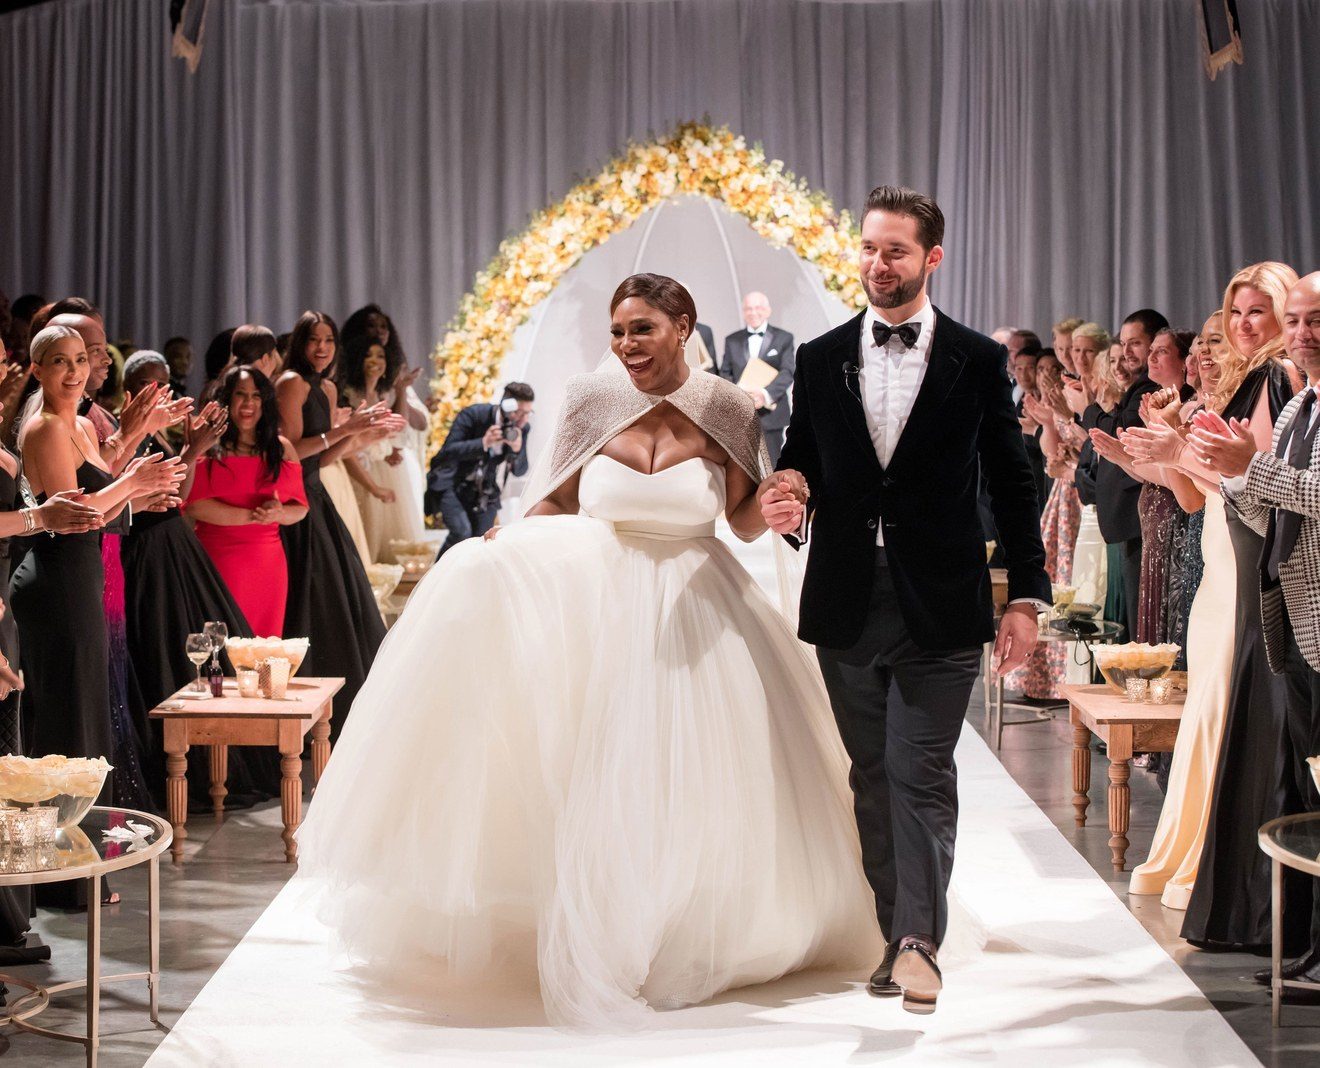 00-story-image-serena-and-alexis-wedding